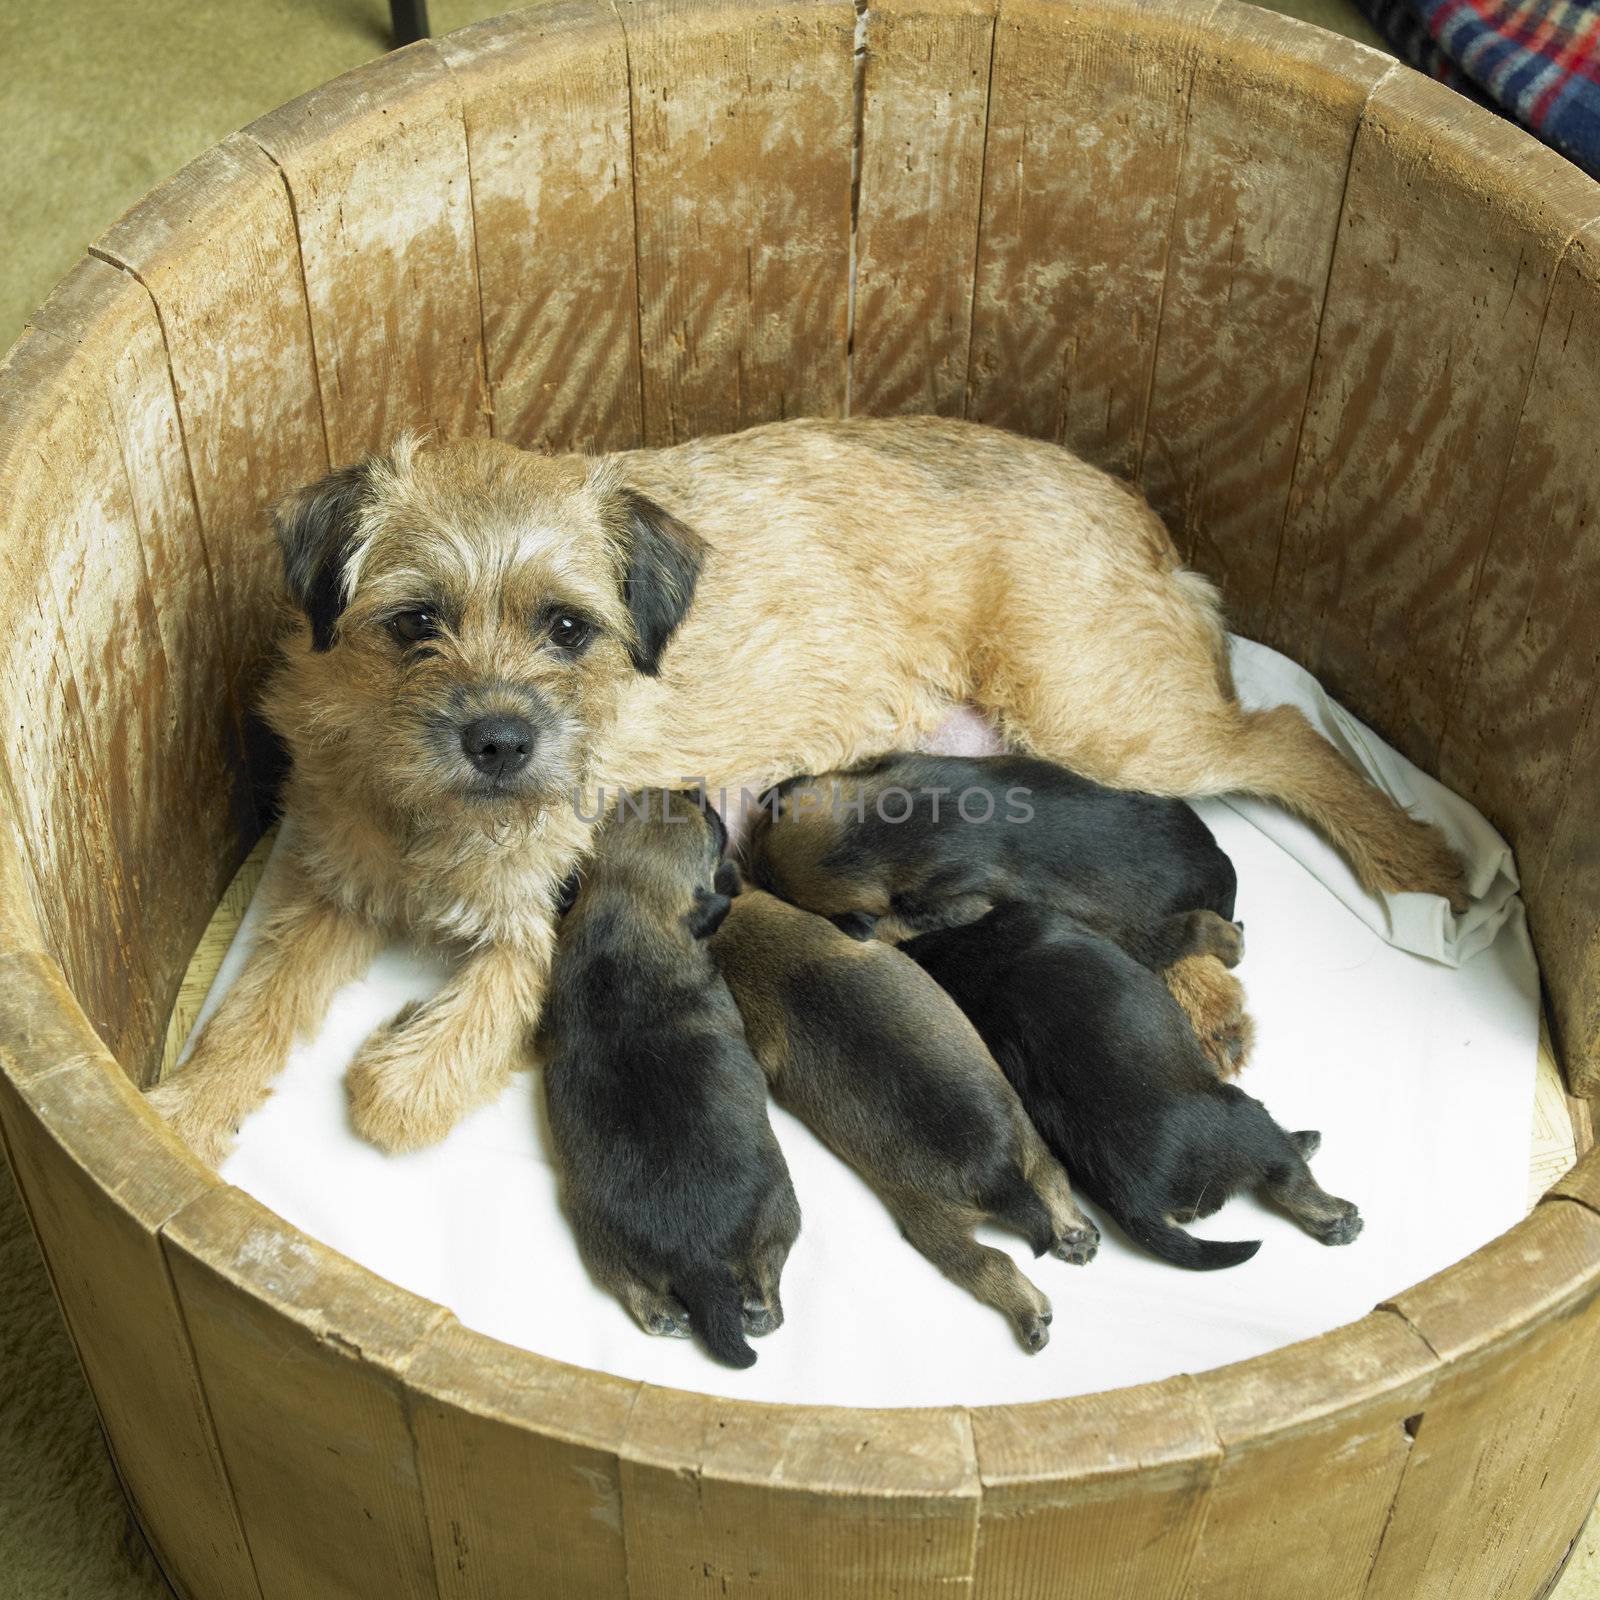 female dog with puppies (Border Terrier) by phbcz